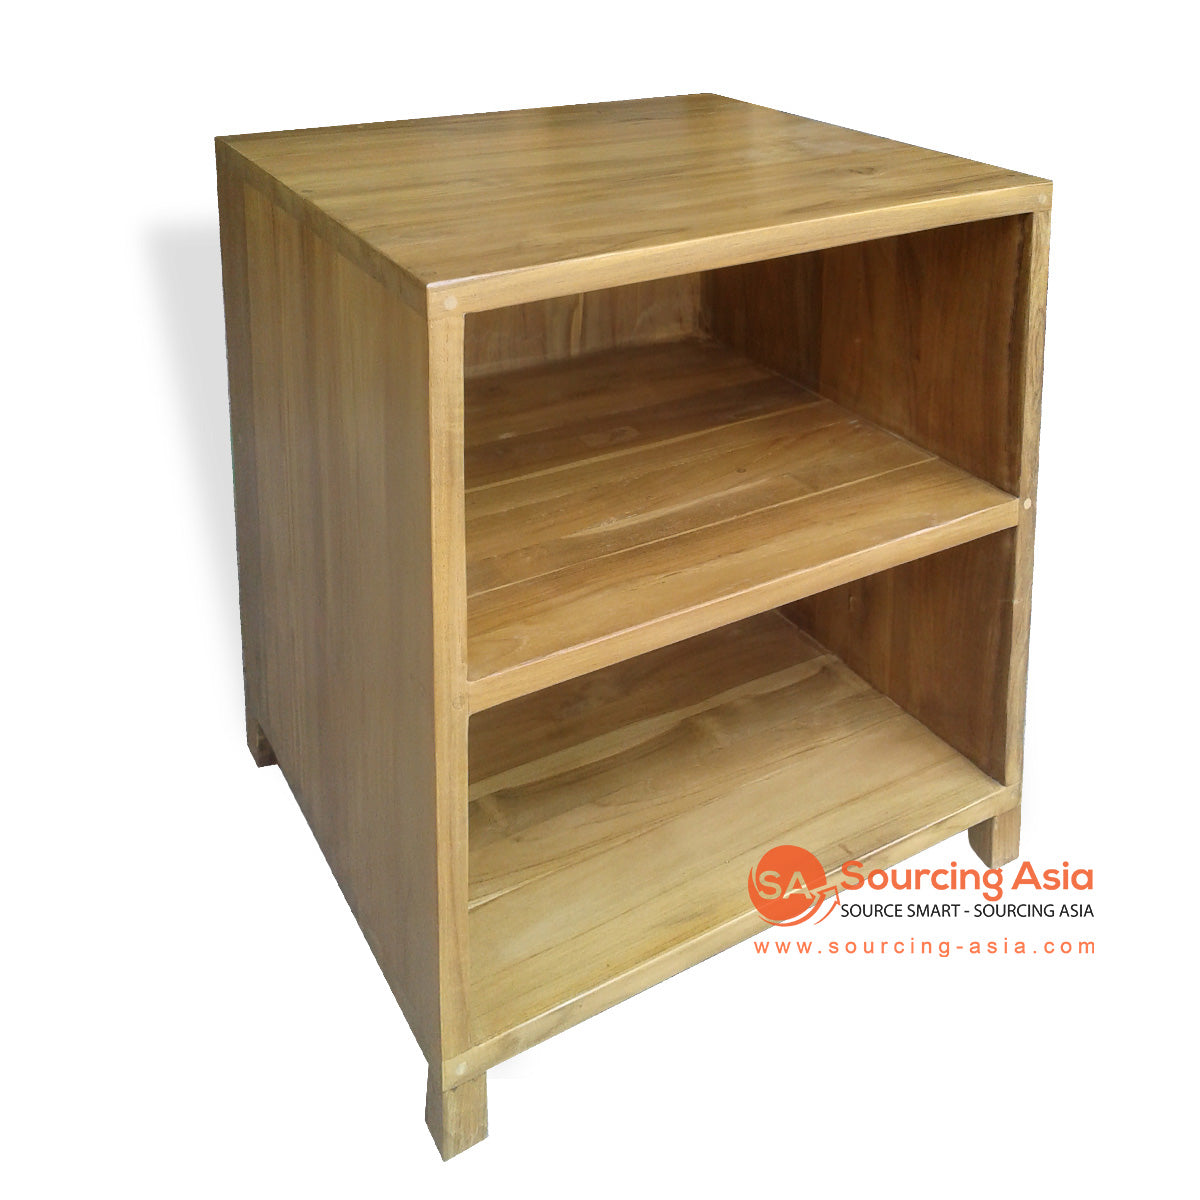 ECL163 NATURAL RECYCLED TEAK WOOD TWO OPEN SHELVES SIDE TABLE